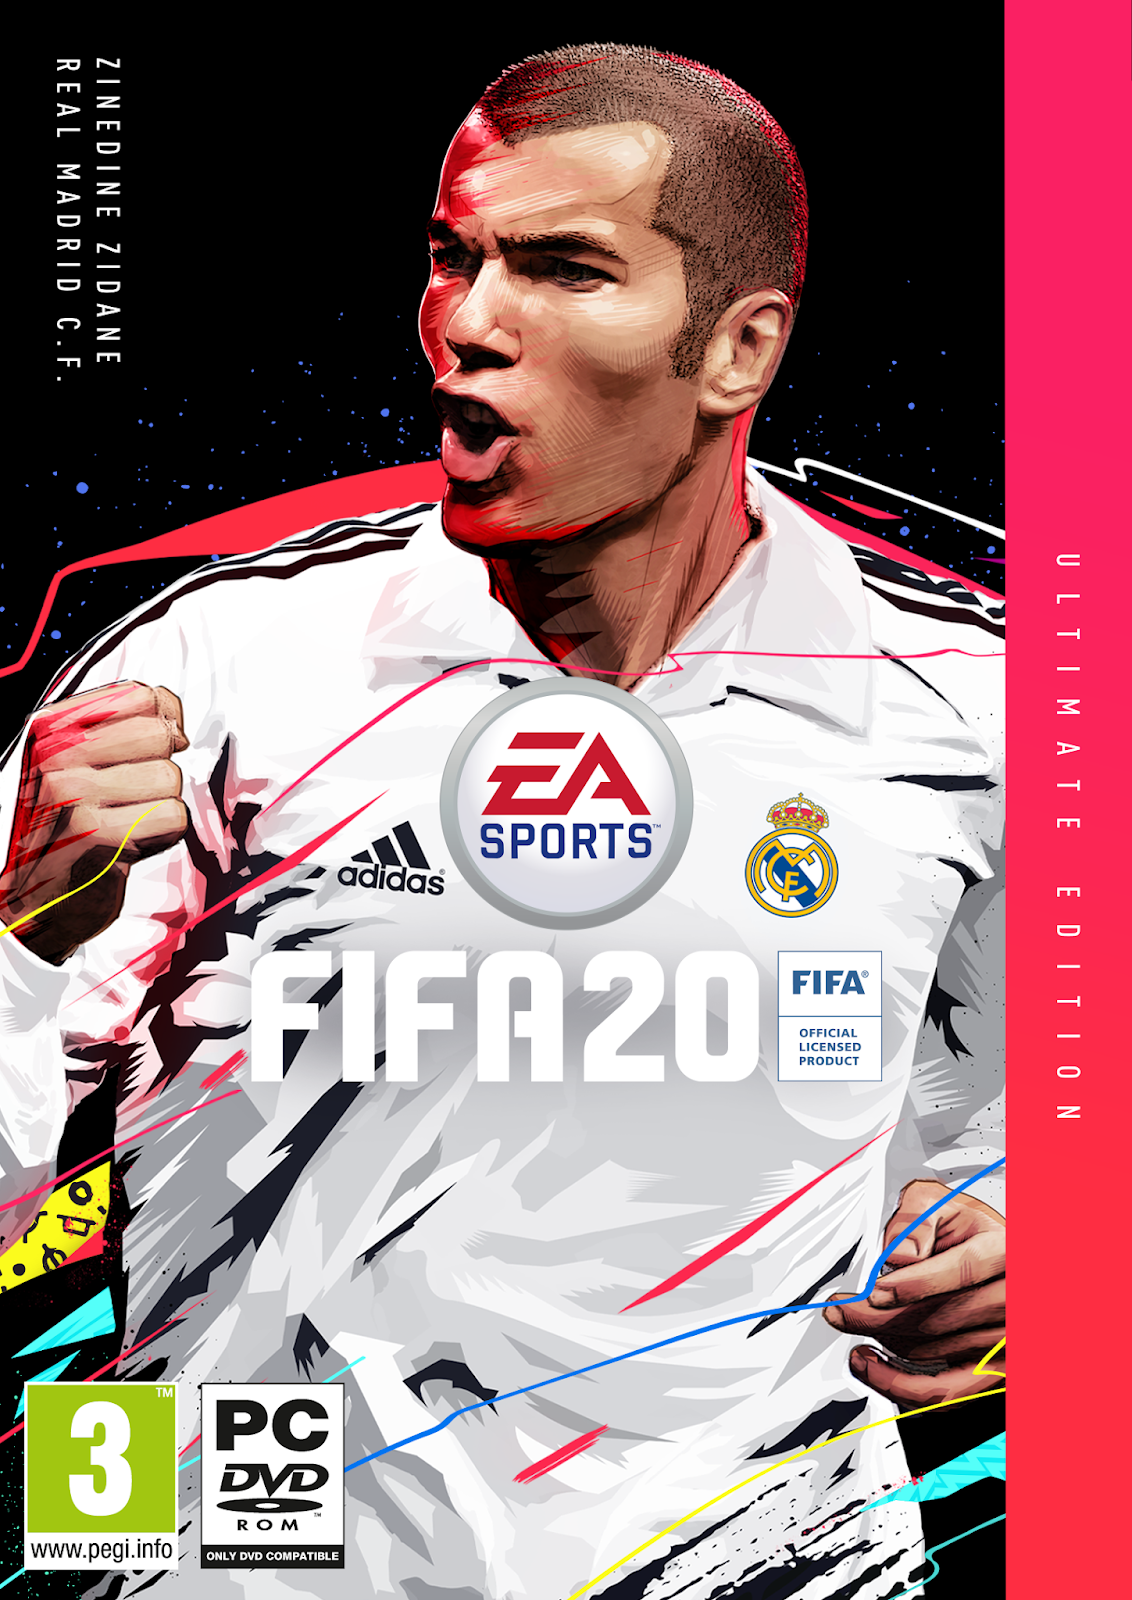 LIGHT DOWNLOADS: FIFA 2020 PC GAME